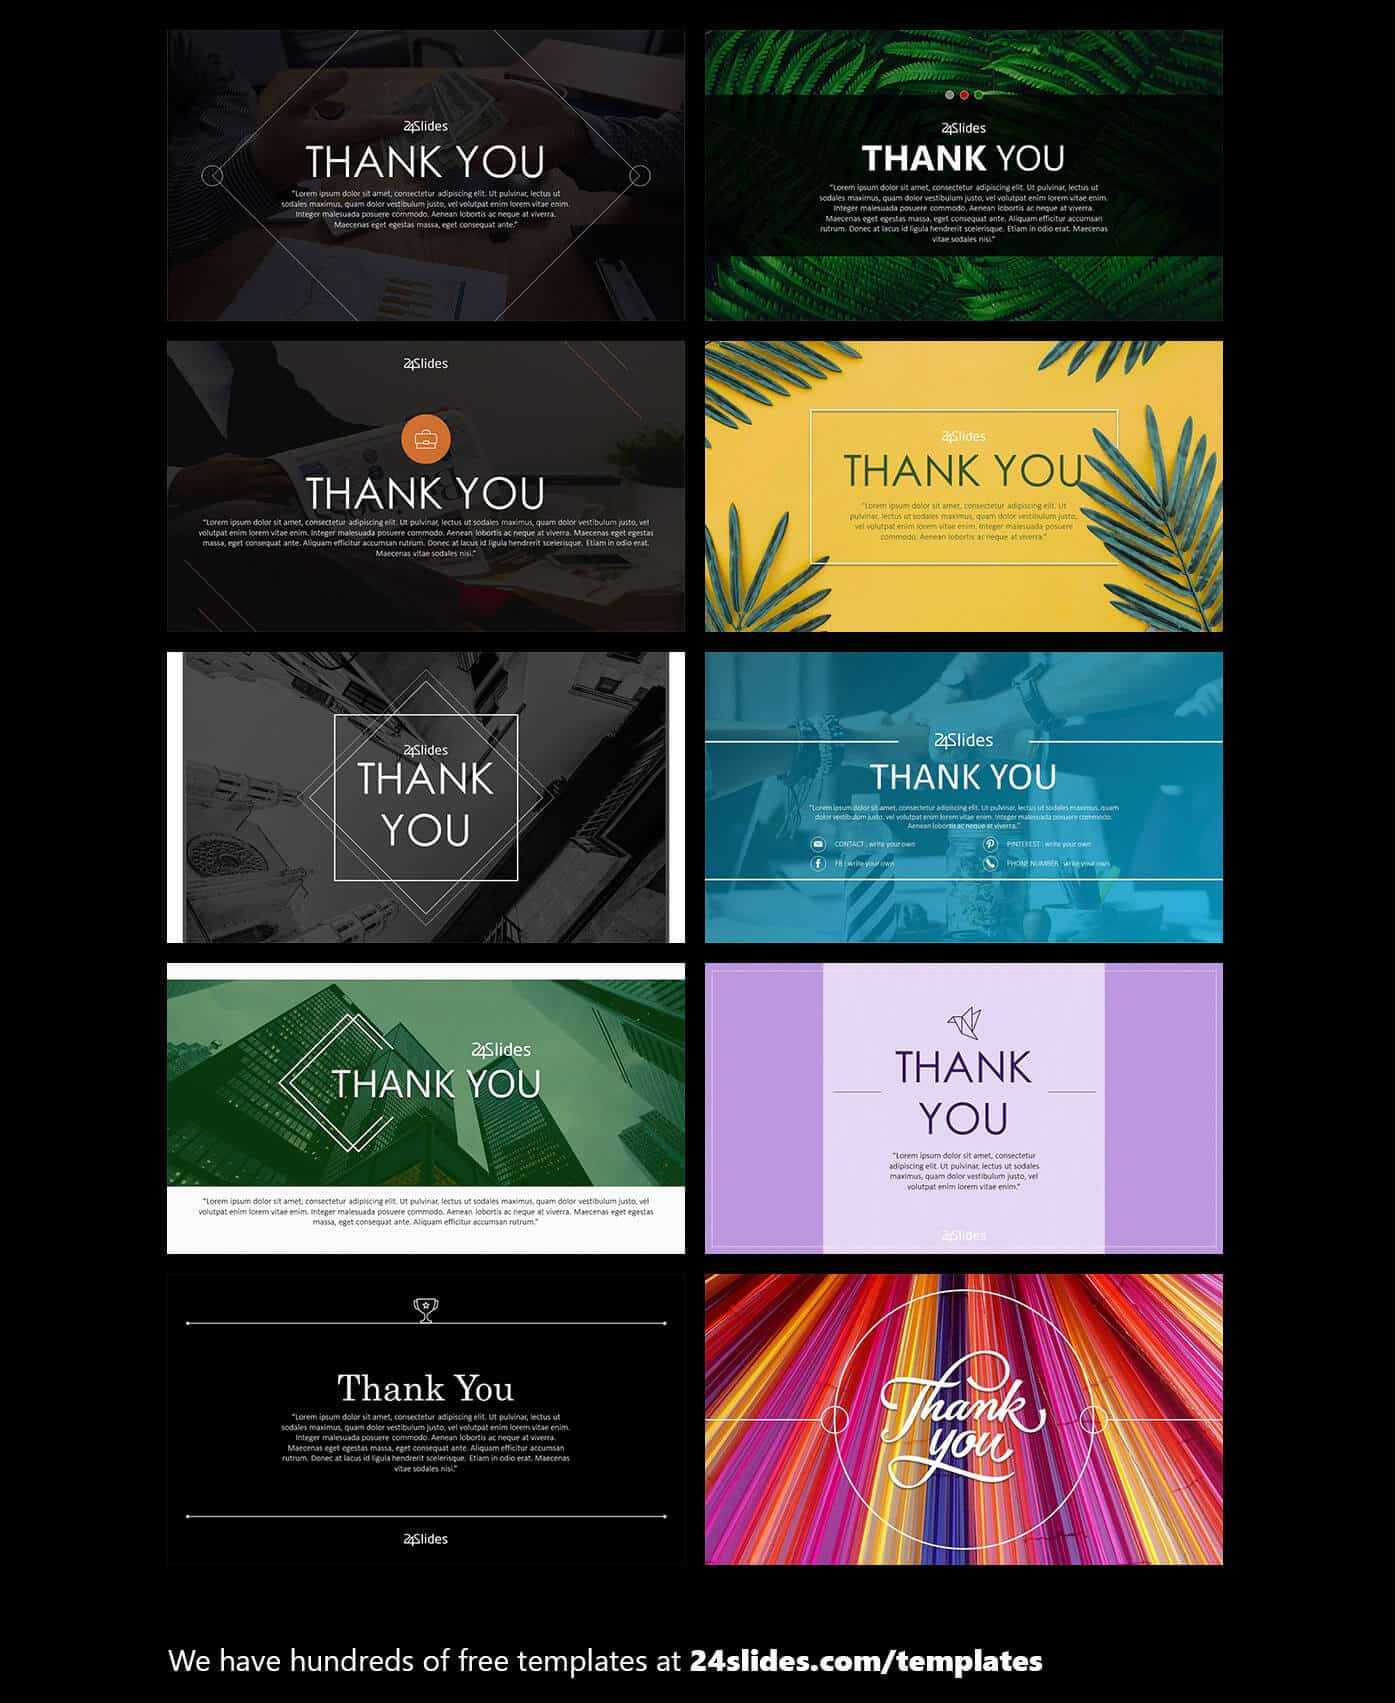 15 Fun And Colorful Free Powerpoint Templates | Present Better With Regard To Fun Powerpoint Templates Free Download